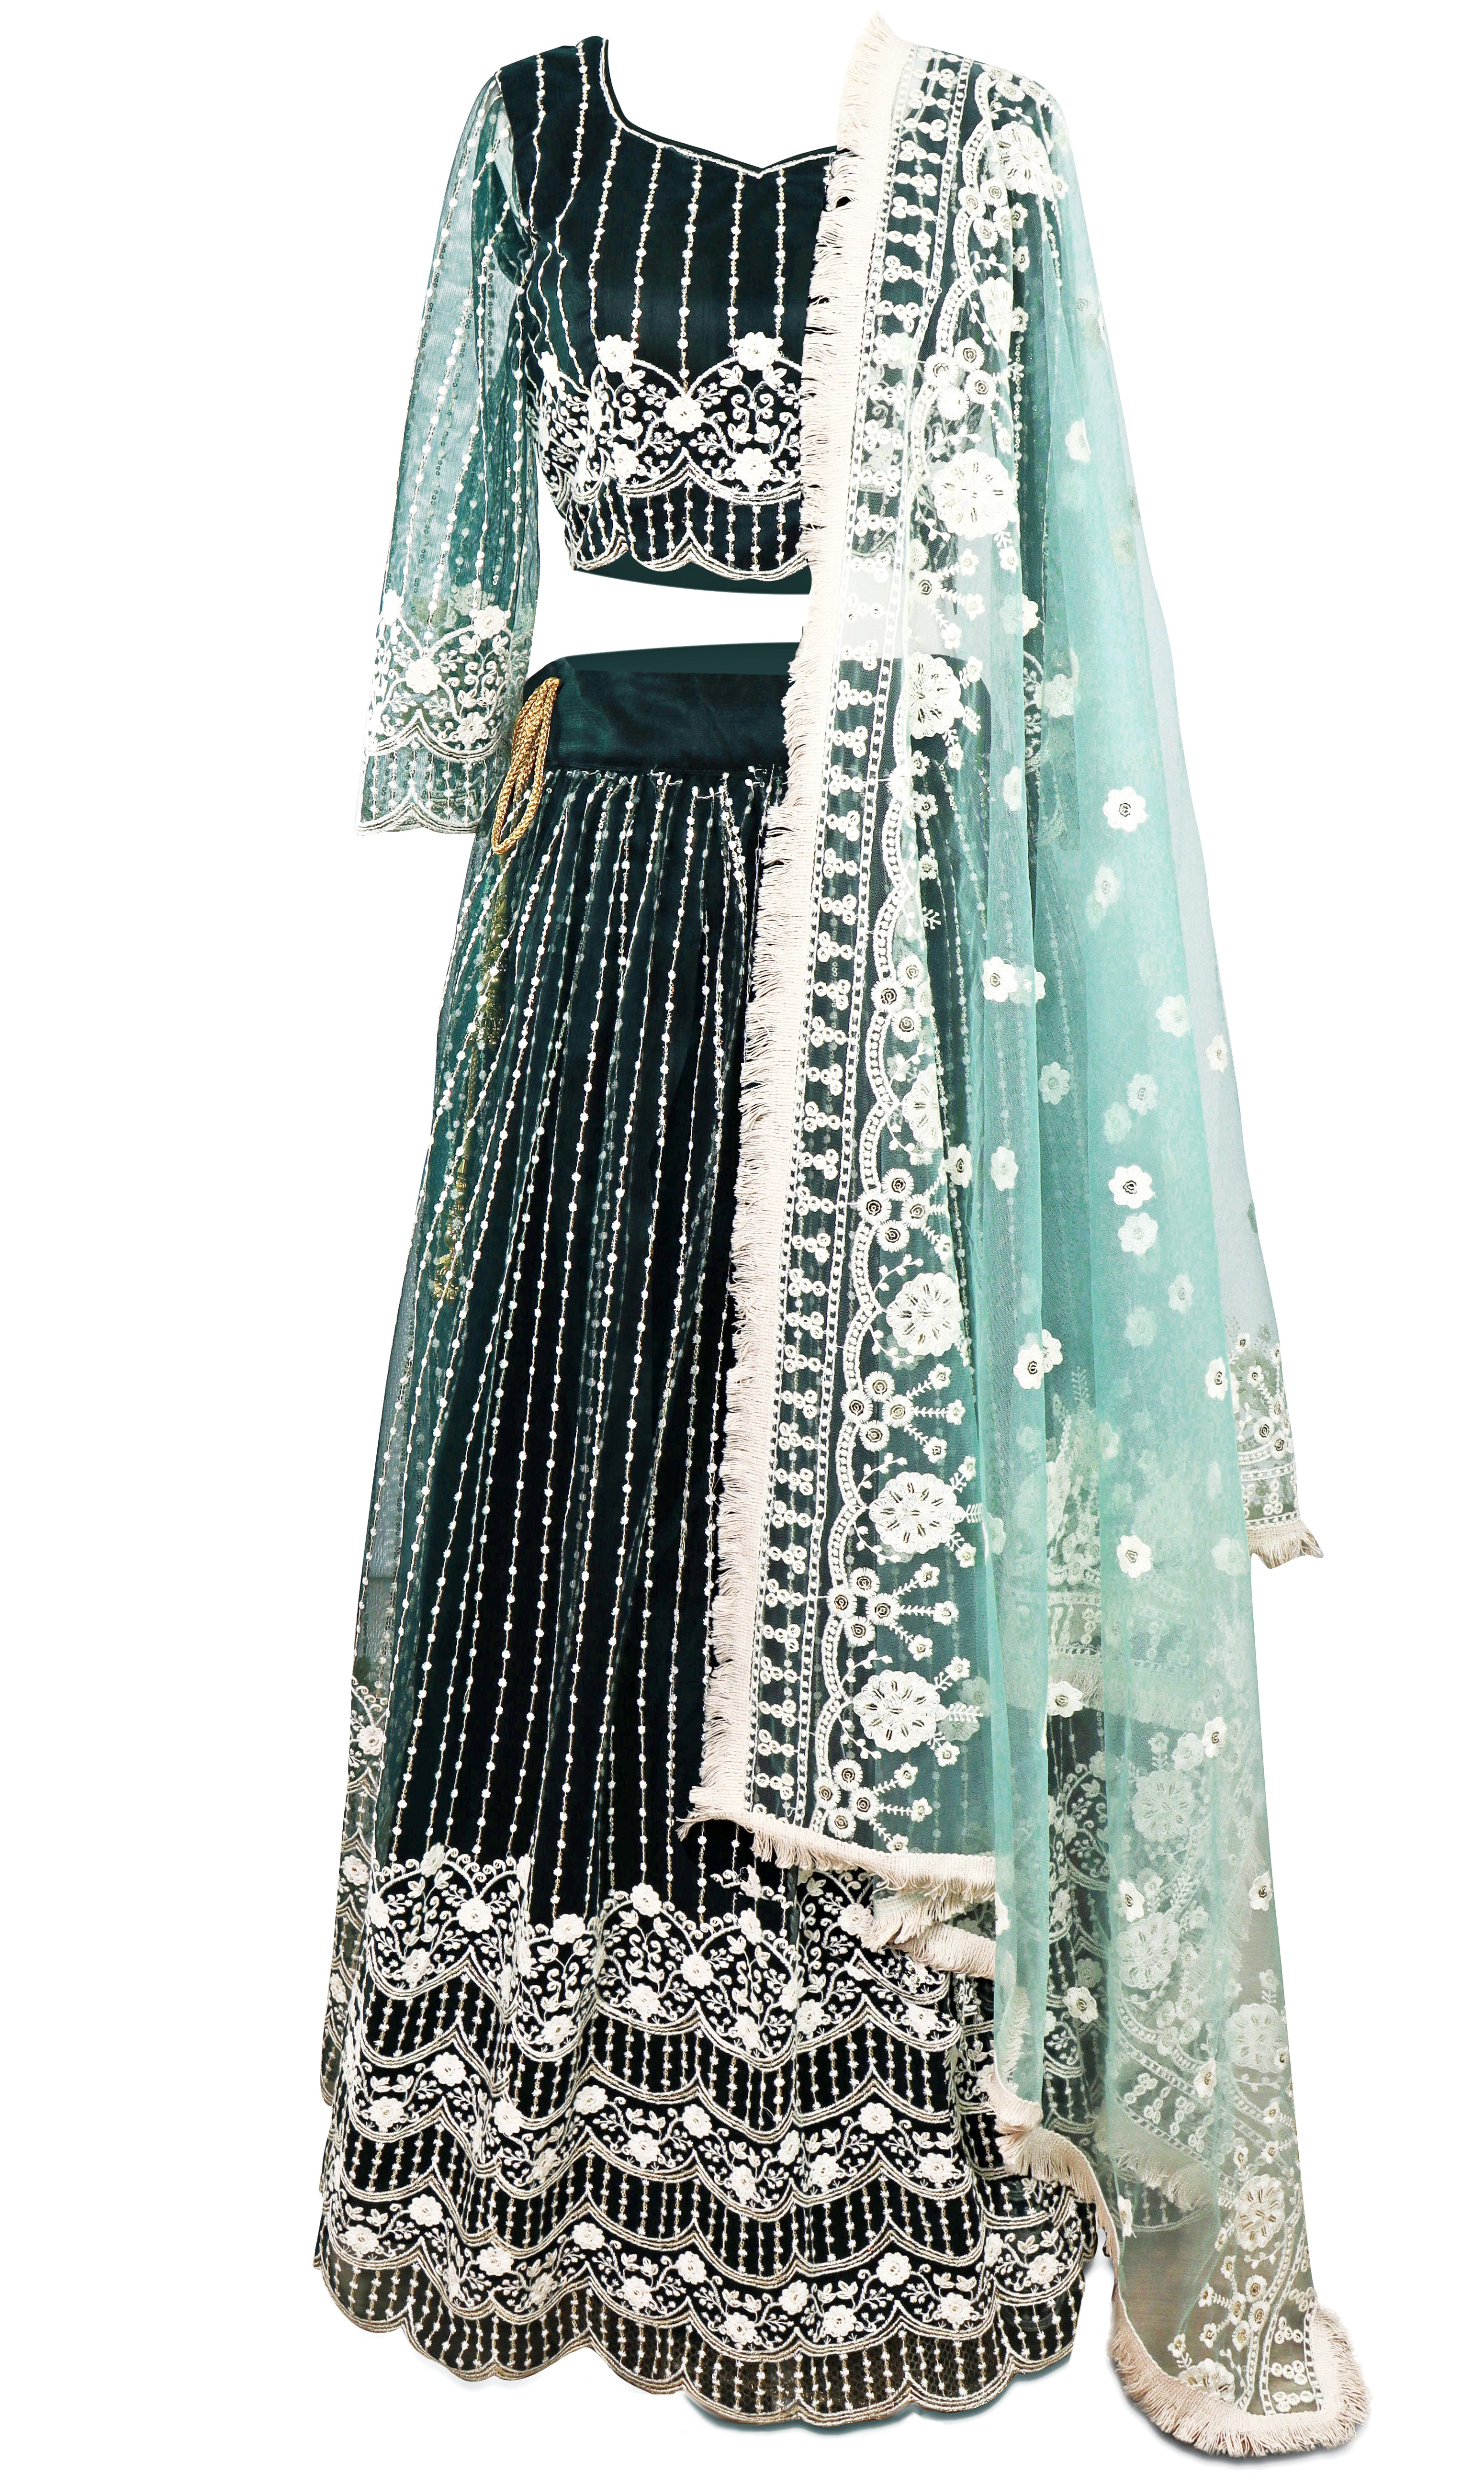 Elegant lace lehenga long-sleeve 3 piece set is forest green in color, covered in off-white lace embroidery.